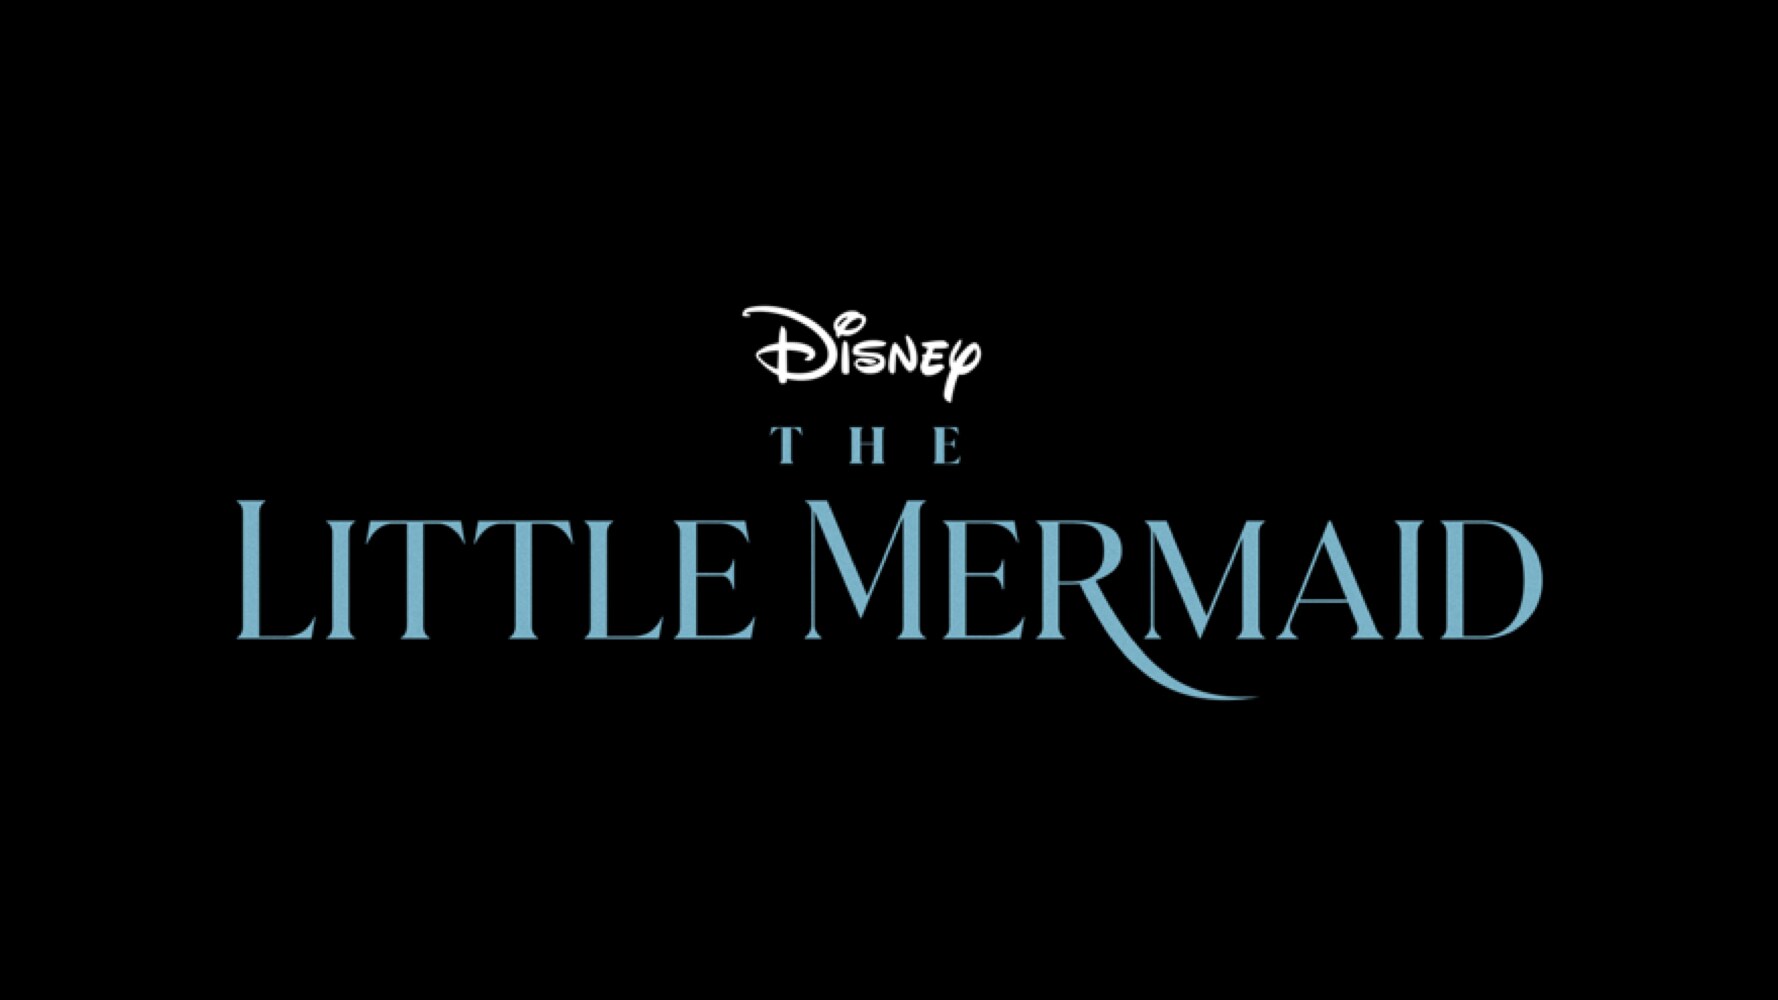 Disney’s Live-Action Reimagining Of “The Little Mermaid” To Debut On Disney+ September 6, 2023